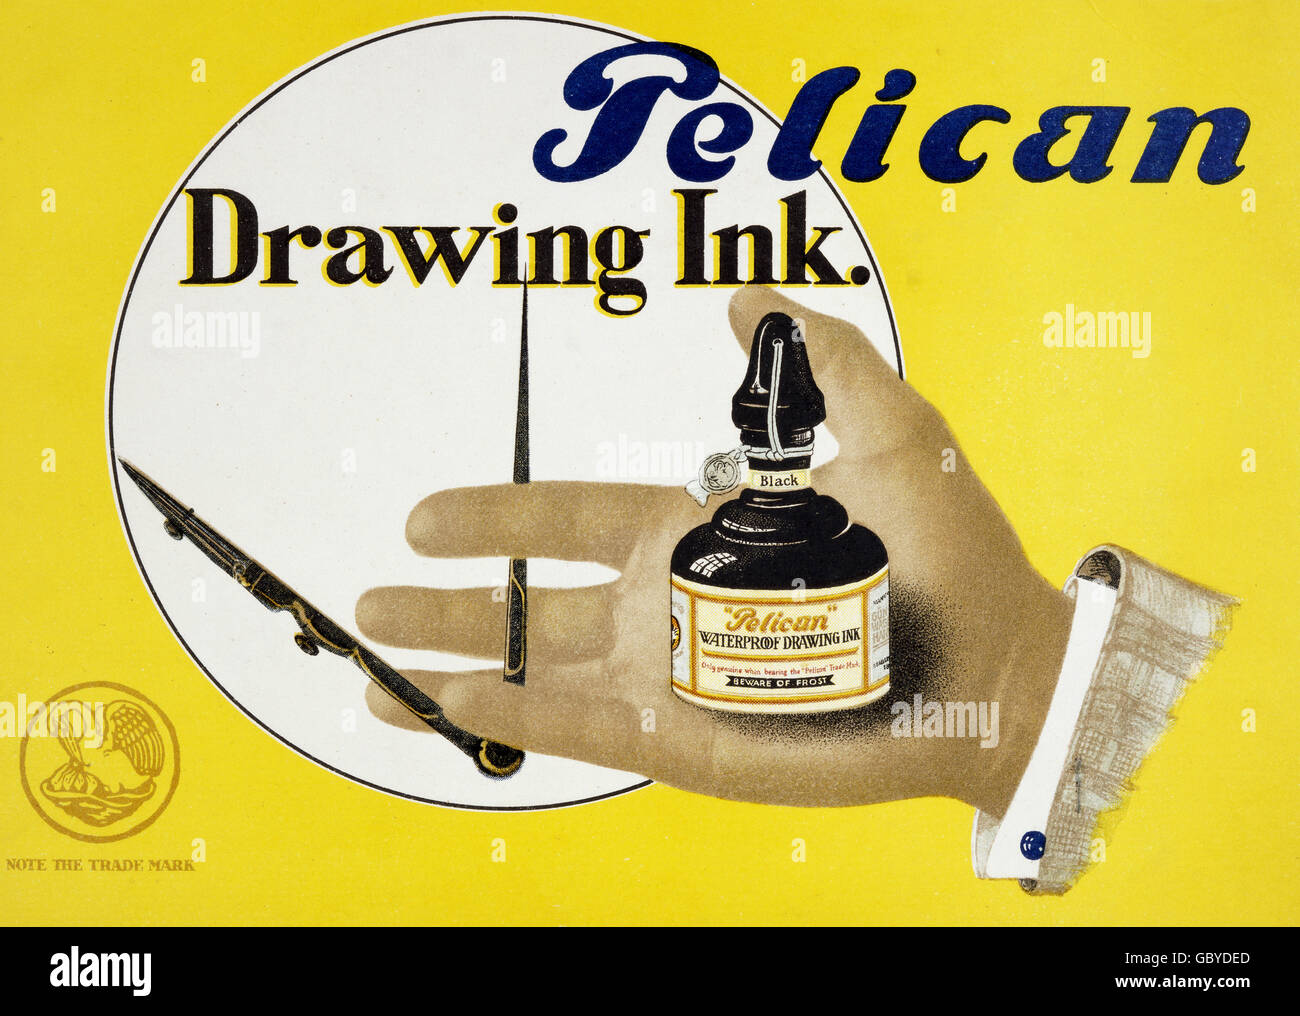 advertising, stationery, Pelican Drawing Ink, poster, lithograph by El Lissitzky (1890 - 1941), 16x22.7 cm, Pelikan, inkpot, pot, compass, 20th century, historic, historical, people, 1940s, Additional-Rights-Clearences-Not Available Stock Photo